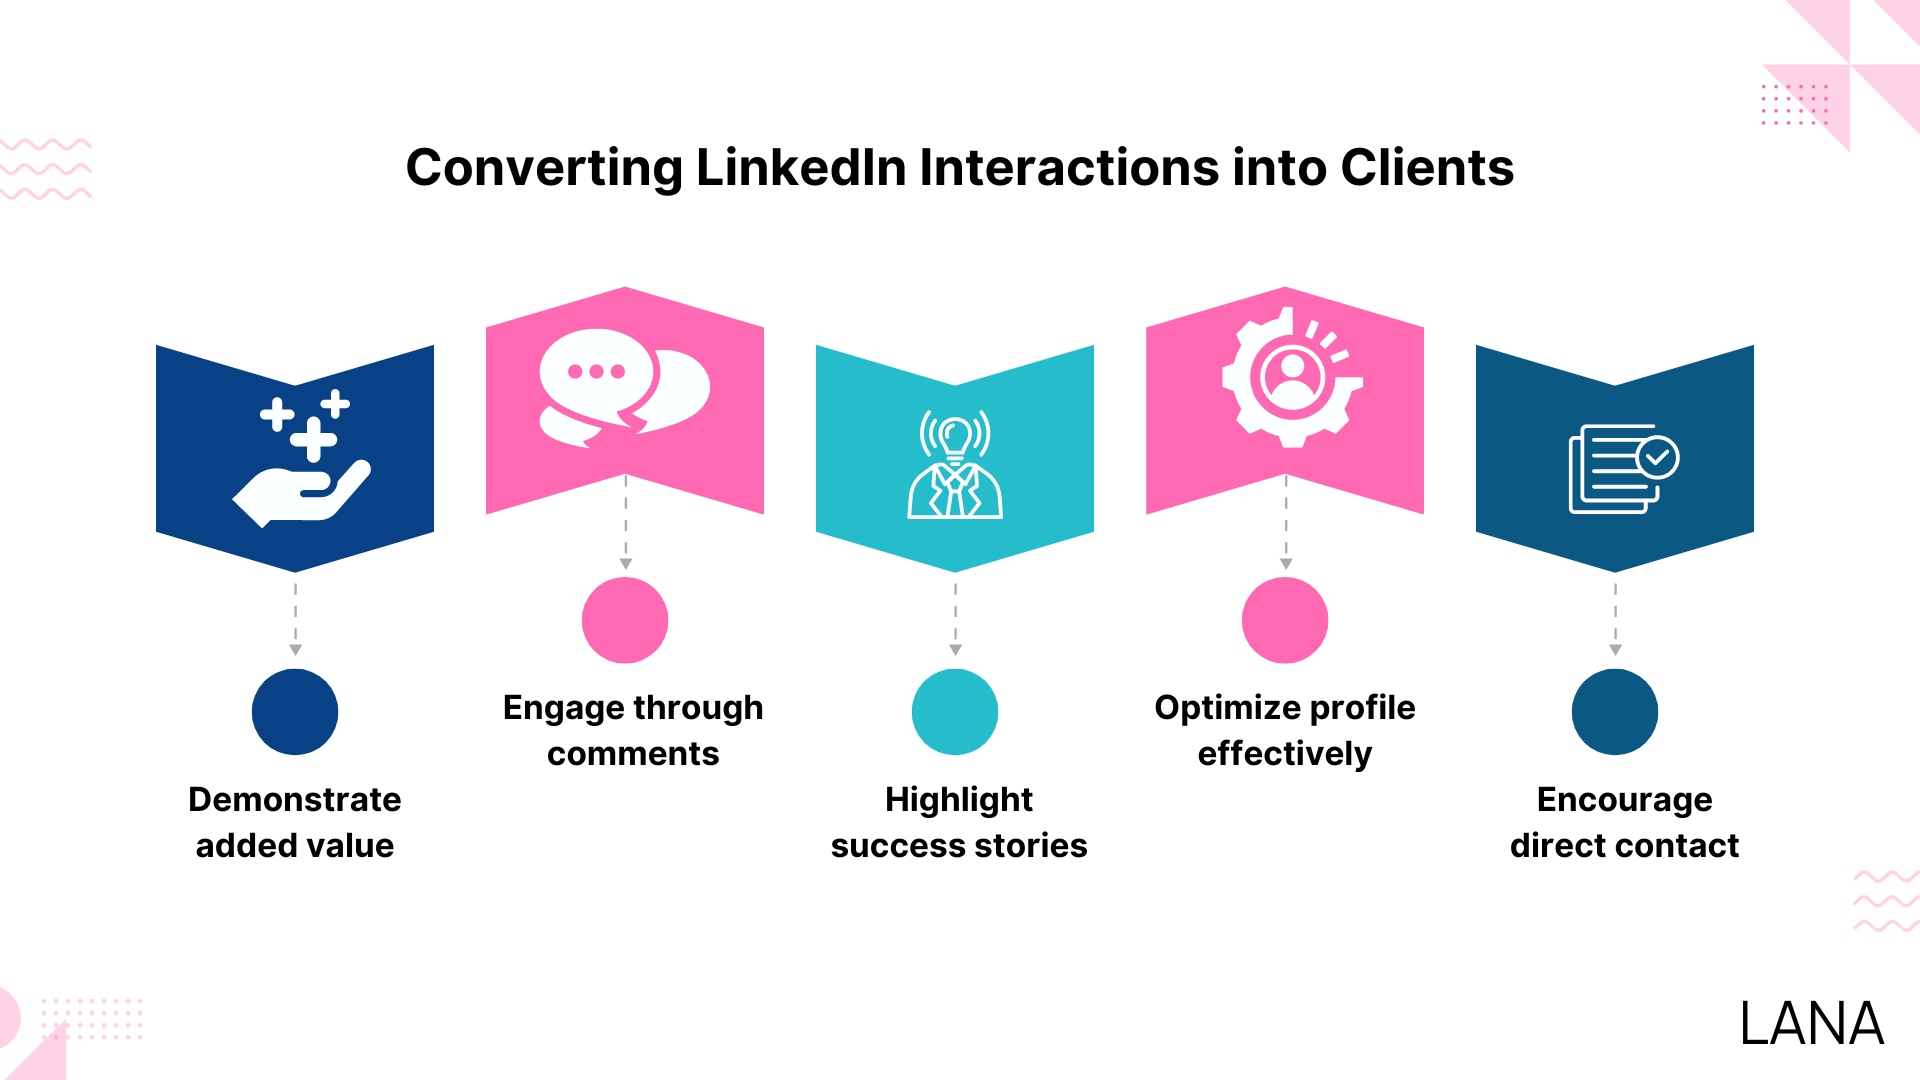 Converting LinkedIn Interactions into Clients